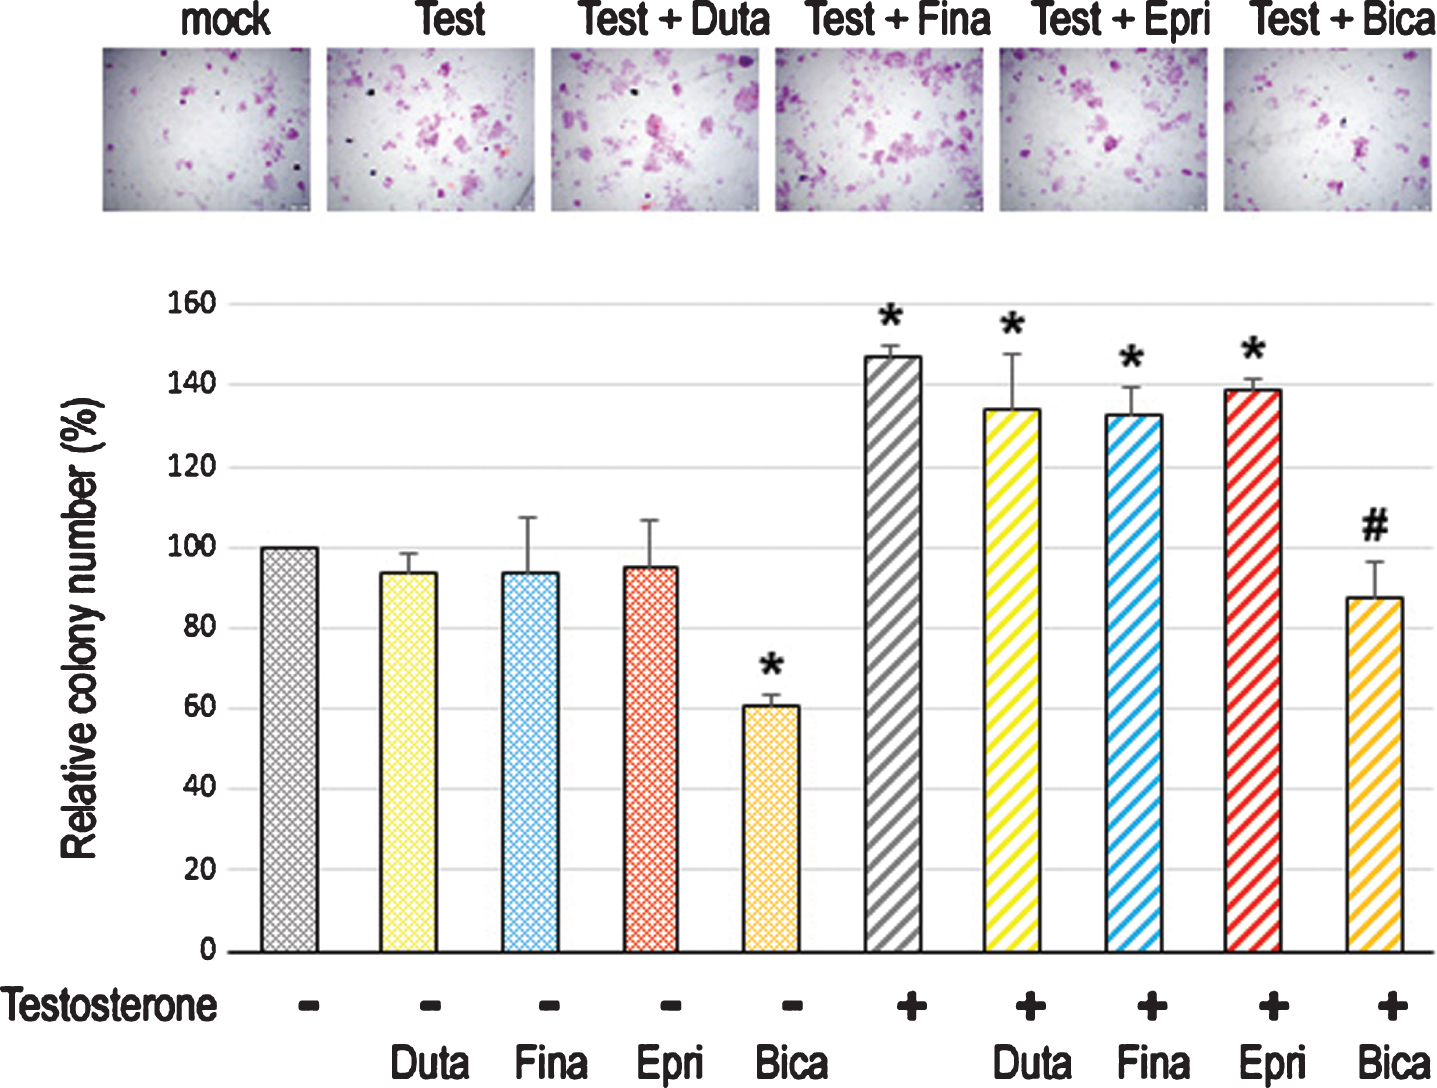 Effects of 5α-RIs on neoplastic transformation of urothelial cells determined by colony-forming ability. Clonogenic assay in SVHUC-AR cells exposed to MCA, subcultured for 6 weeks in medium containing 5% FBS as well as ethanol (mock), dutasteride (Duta; 100 nM), finasteride (Fina; 500 nM), epristeride (Epri; 5μM), bicalutamide (Bica; 5μM), and/or testosterone (Test; 10 nM), and further incubated for 2 weeks without 5α-RI/testosterone treatment. The number of colony consisting of ≥20 cells is presented relative to that of mock-treated cells. Each value represents the mean (+SD) from three independent experiments. *P < 0.05 (vs. mock treatment). #P < 0.05 (vs. testosterone treatment).